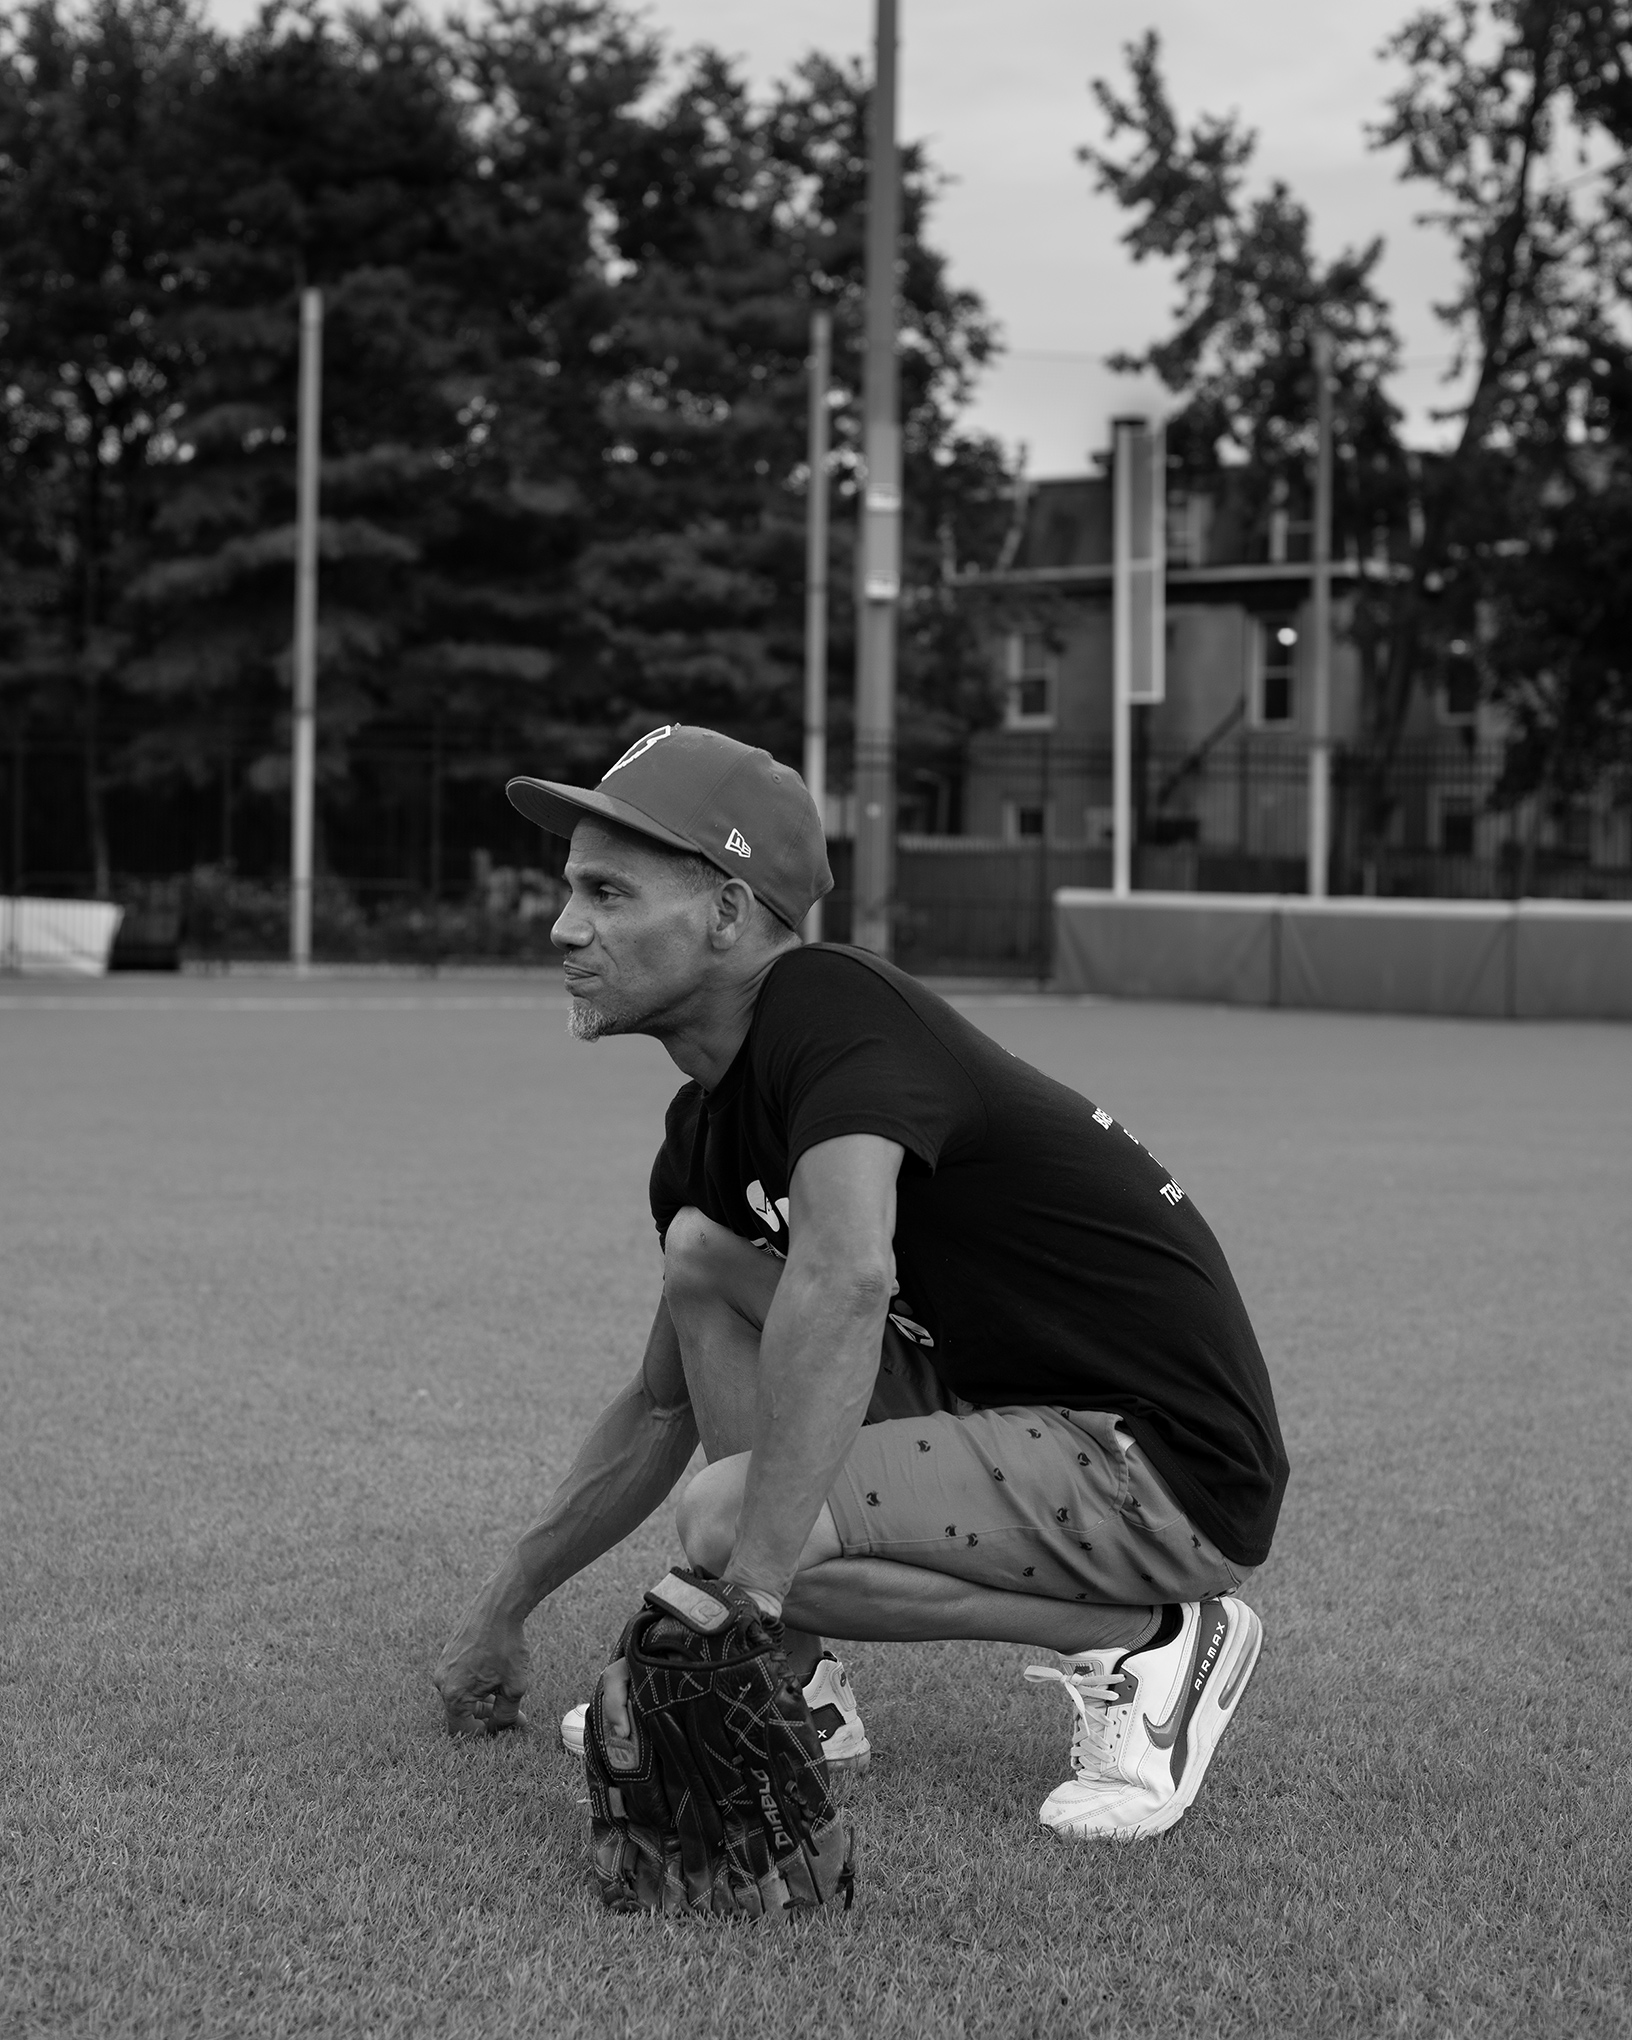 Bryan Morton, on July 16, coaching a team for the Little League he started in Camden in 2011, says his city’s relaunched police department has done a good job of establishing partnerships with residents. (Widline Cadet for TIME)